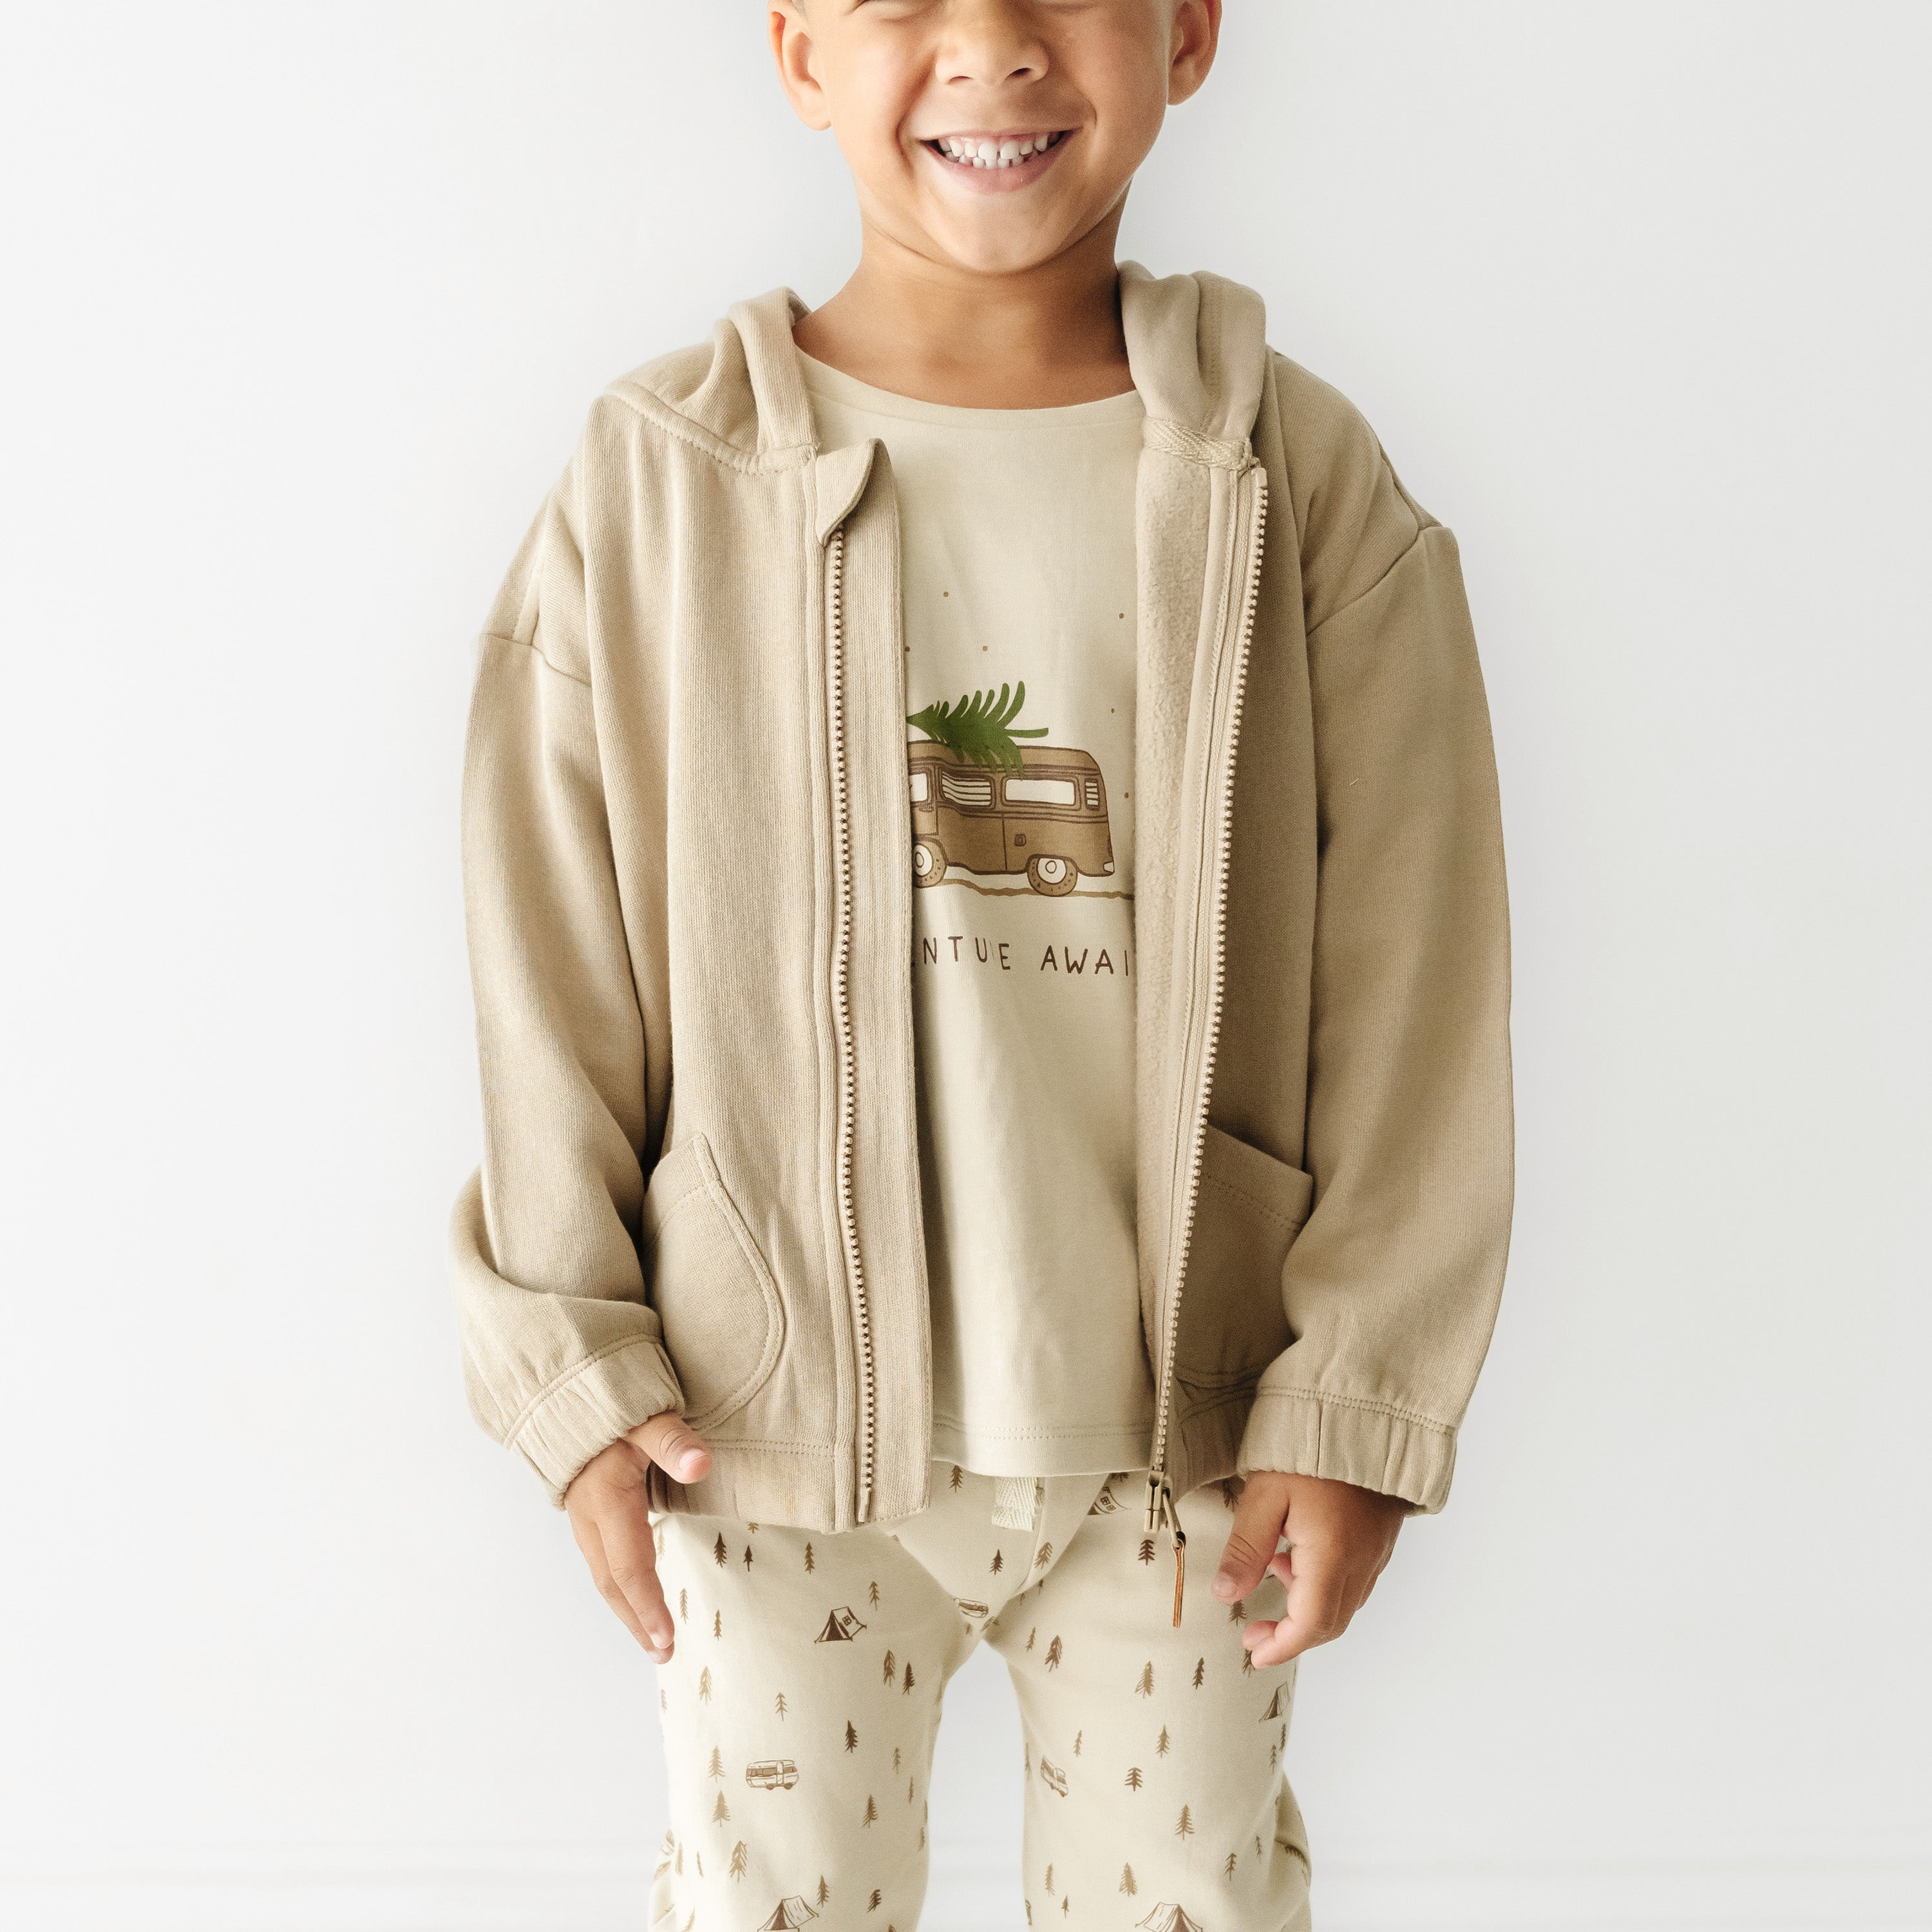 A young child smiling, wearing a Organic Baby Hooded Jacket in Mocha with a graphic of a van and "adventure away" text, paired with matching pants printed with teepees and trees.